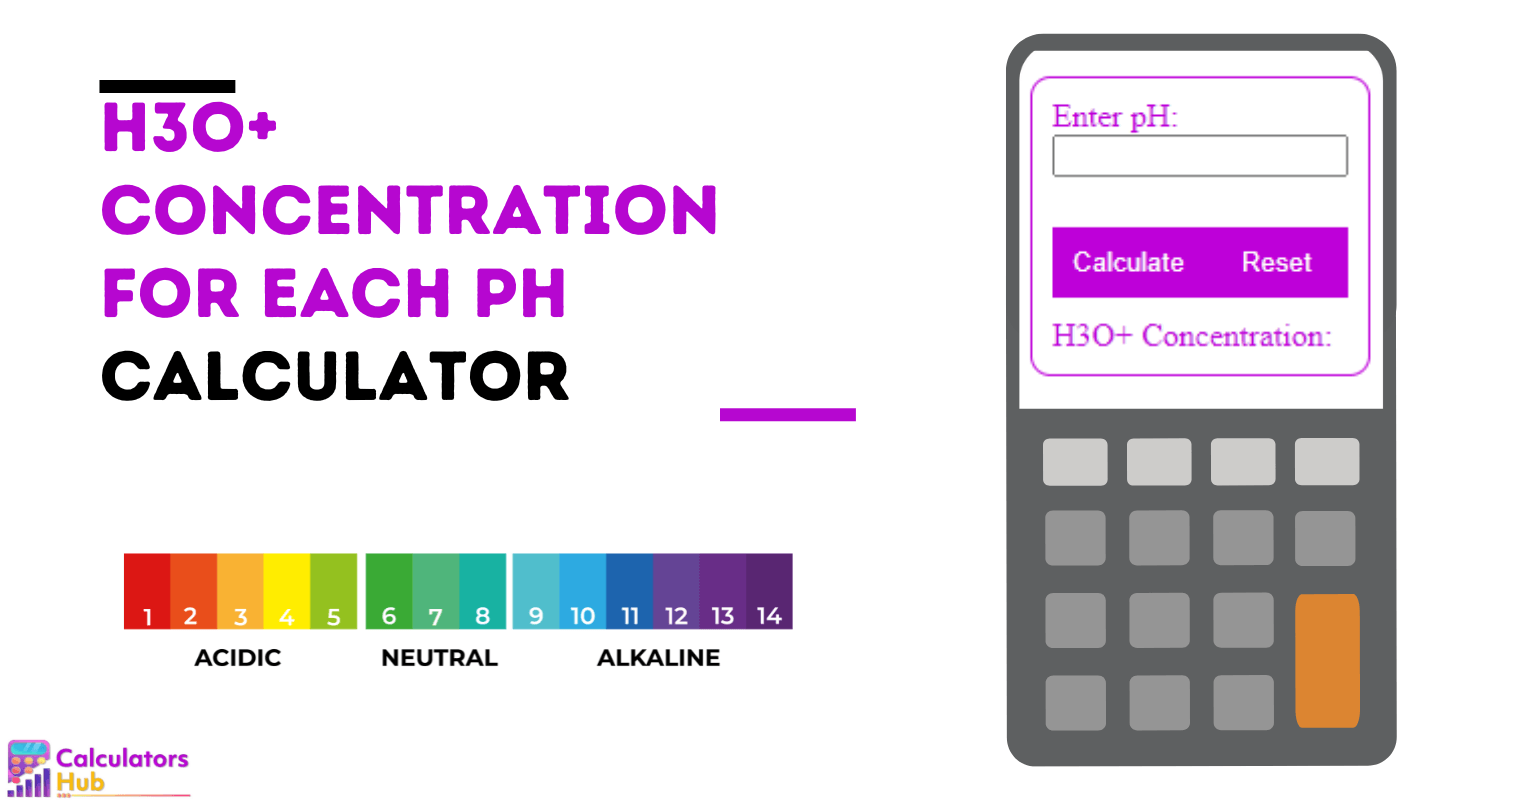 H3O+ Concentration for Each pH Calculator